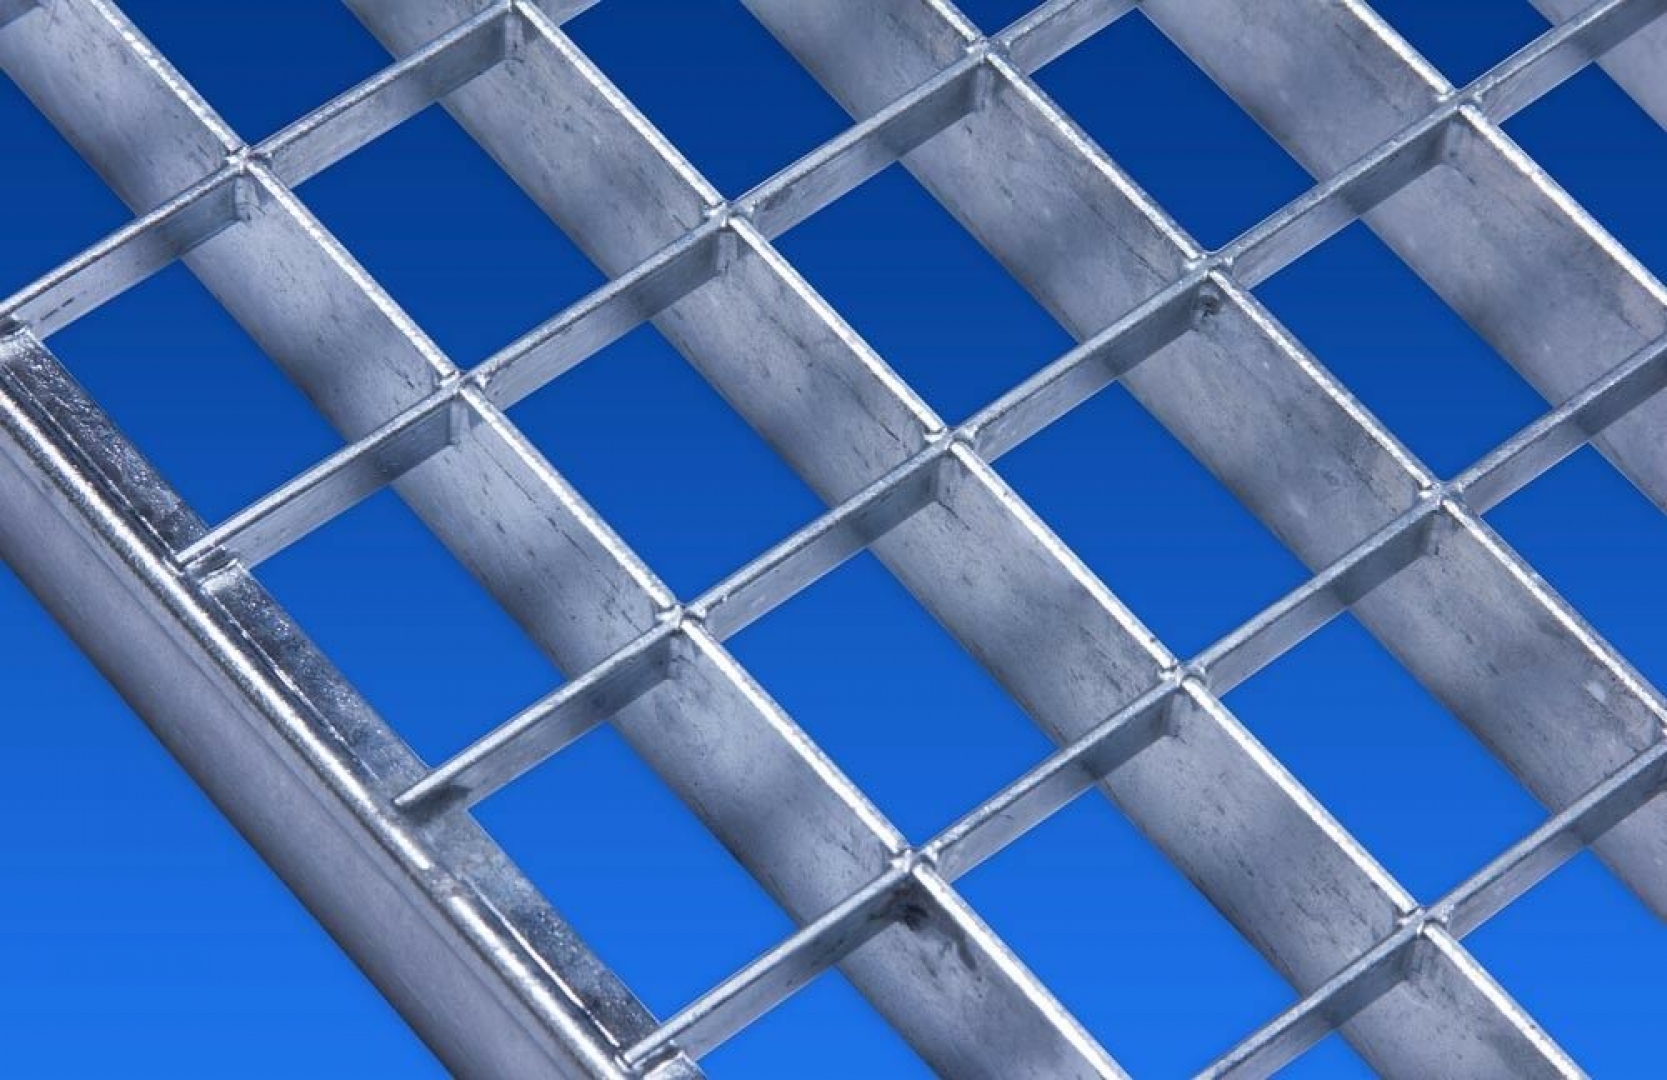 Baunorm Grating 490x990mm galvanized mesh size 30x30mm height 20mm without frame